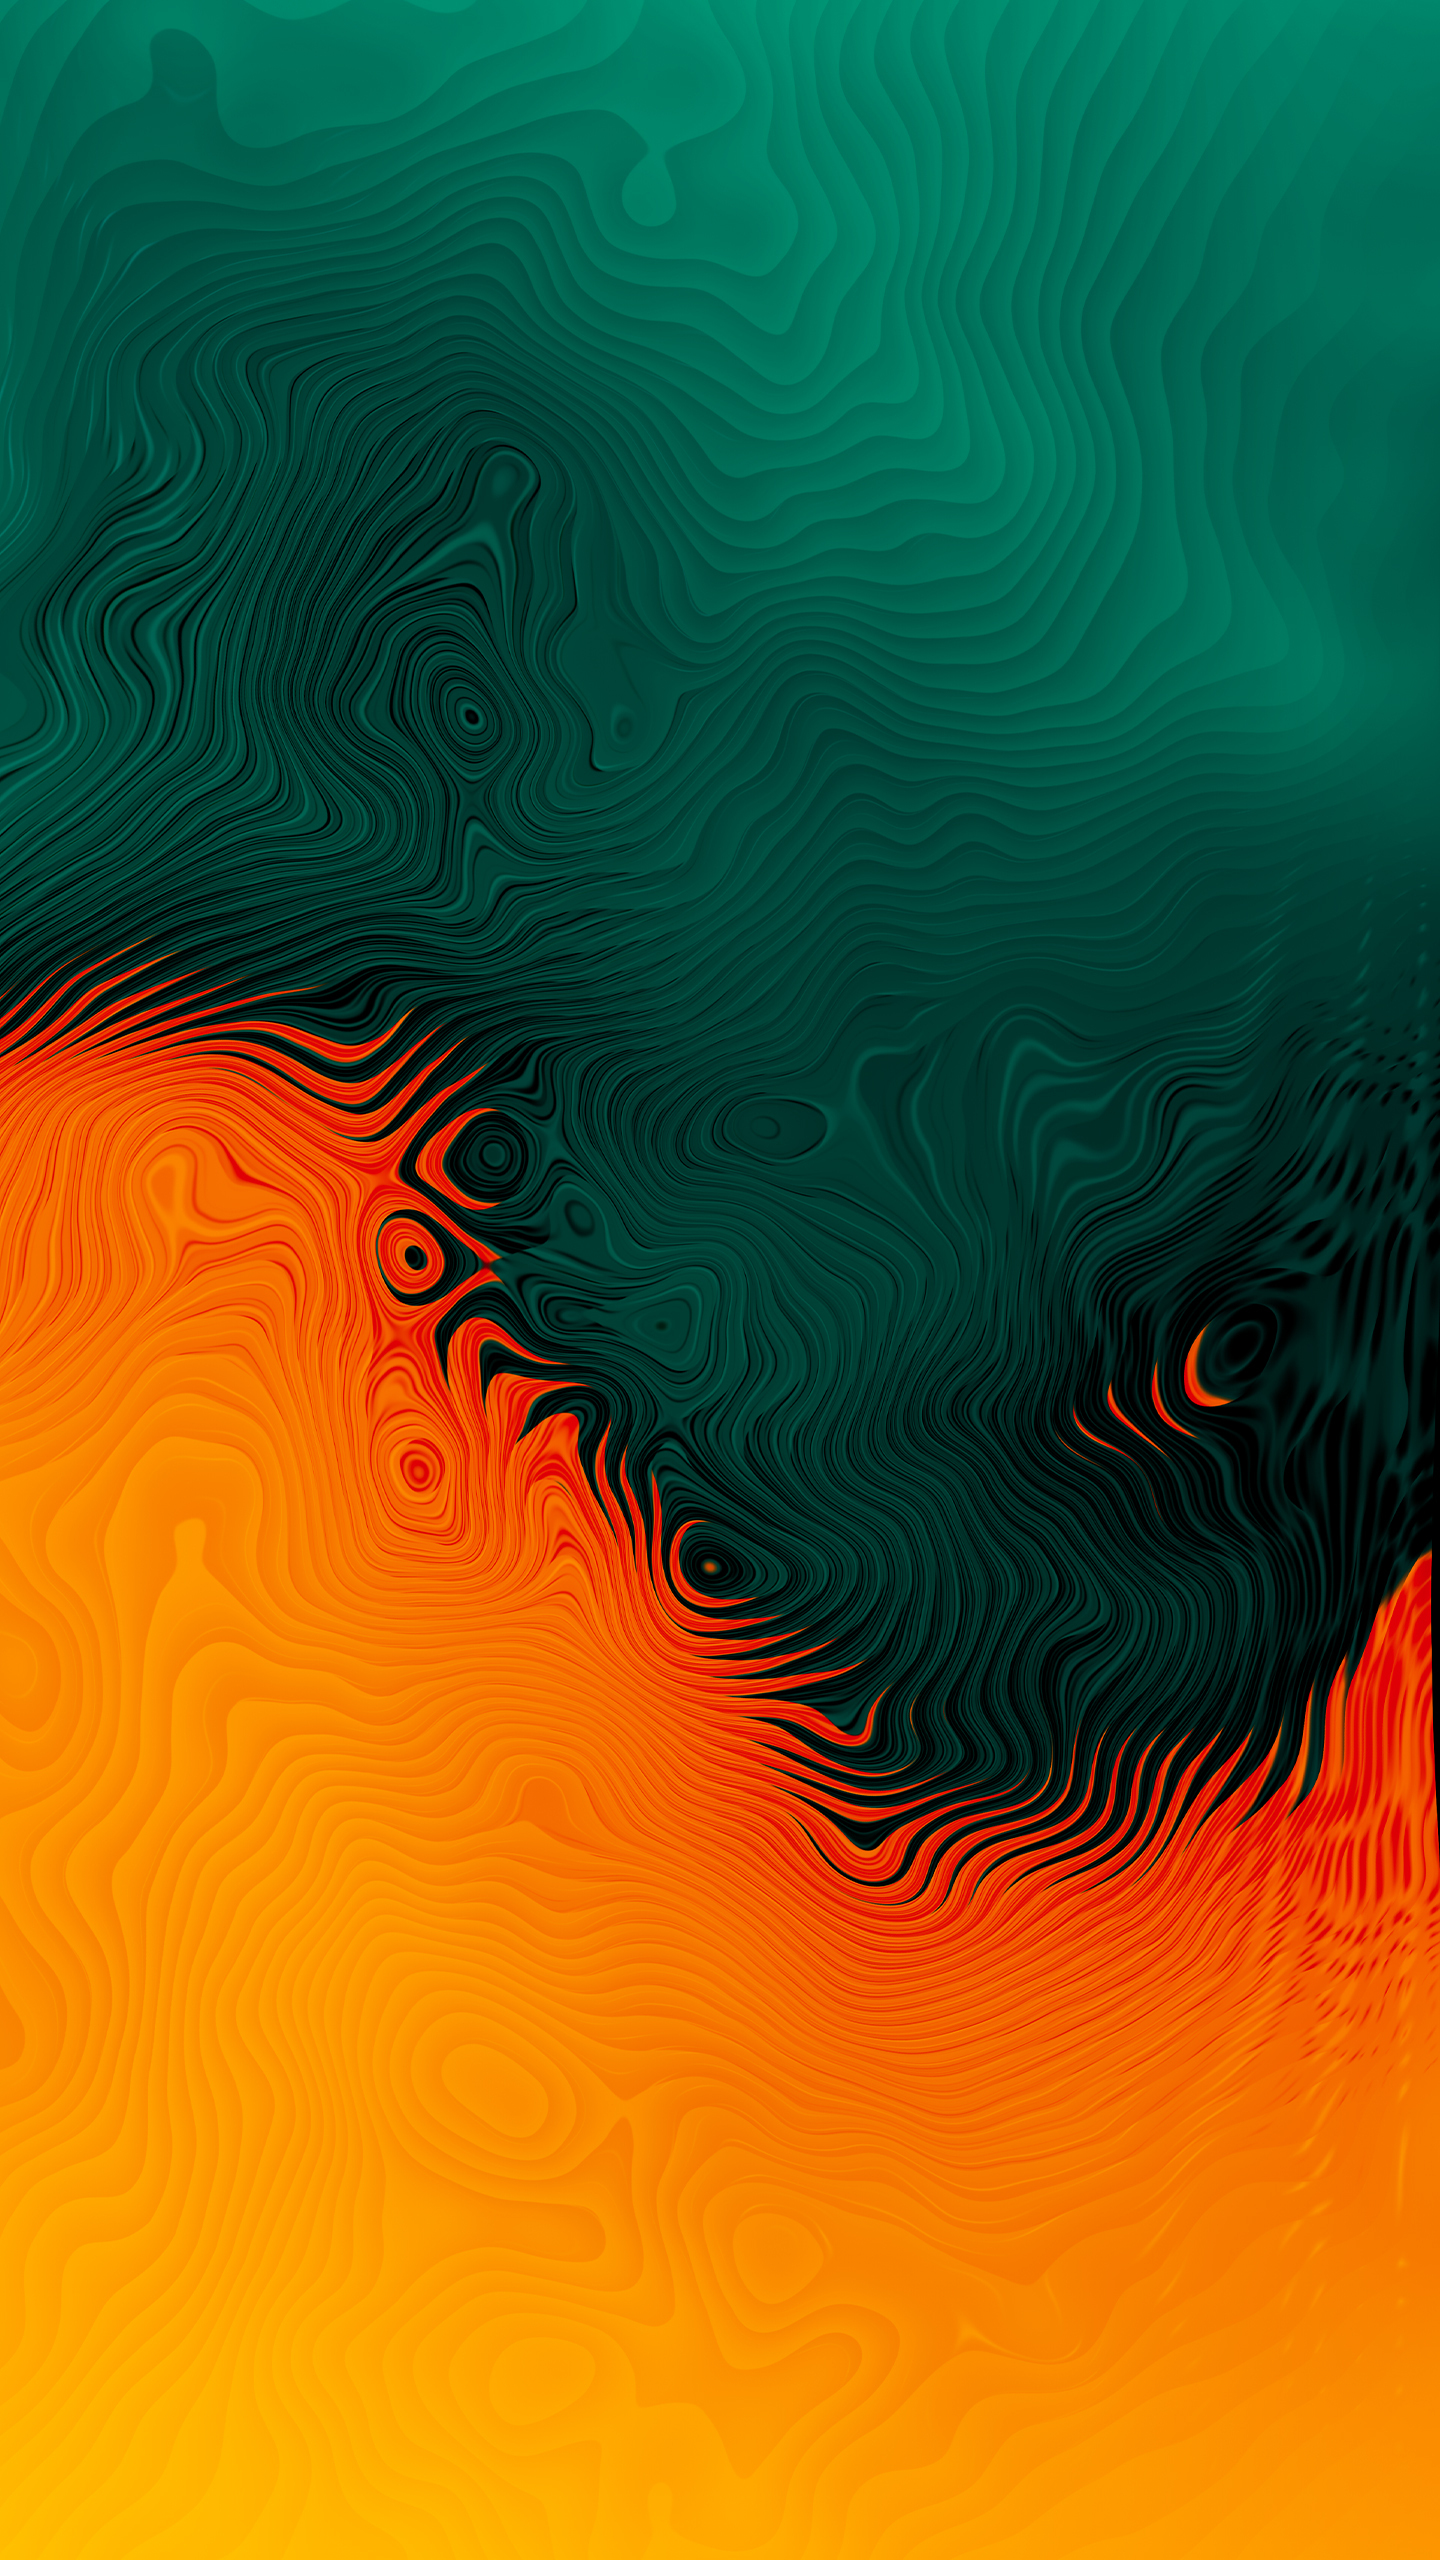 Orange Green Abstract 4k Samsung Galaxy S S7 , Google Pixel XL , Nexus 6P , LG G5 HD 4k Wallpaper, Image, Background, Photo and Picture